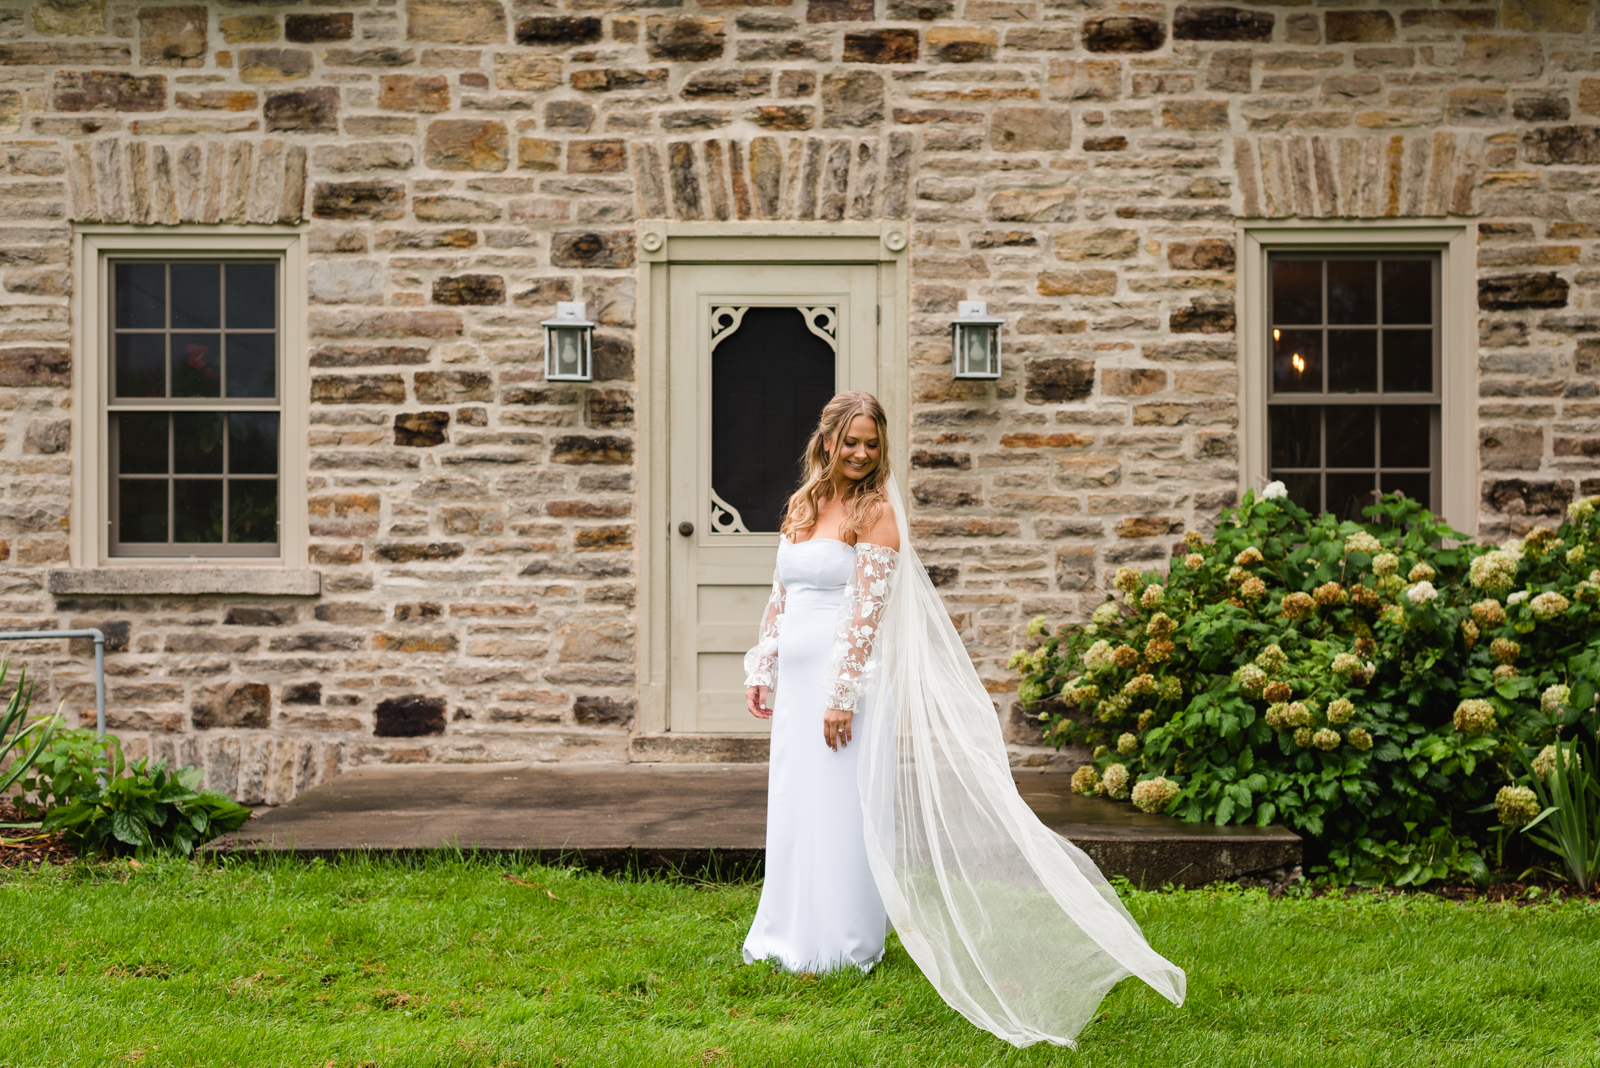 bride's cathedral veil blowing in the wind in front of old stone farmhouse